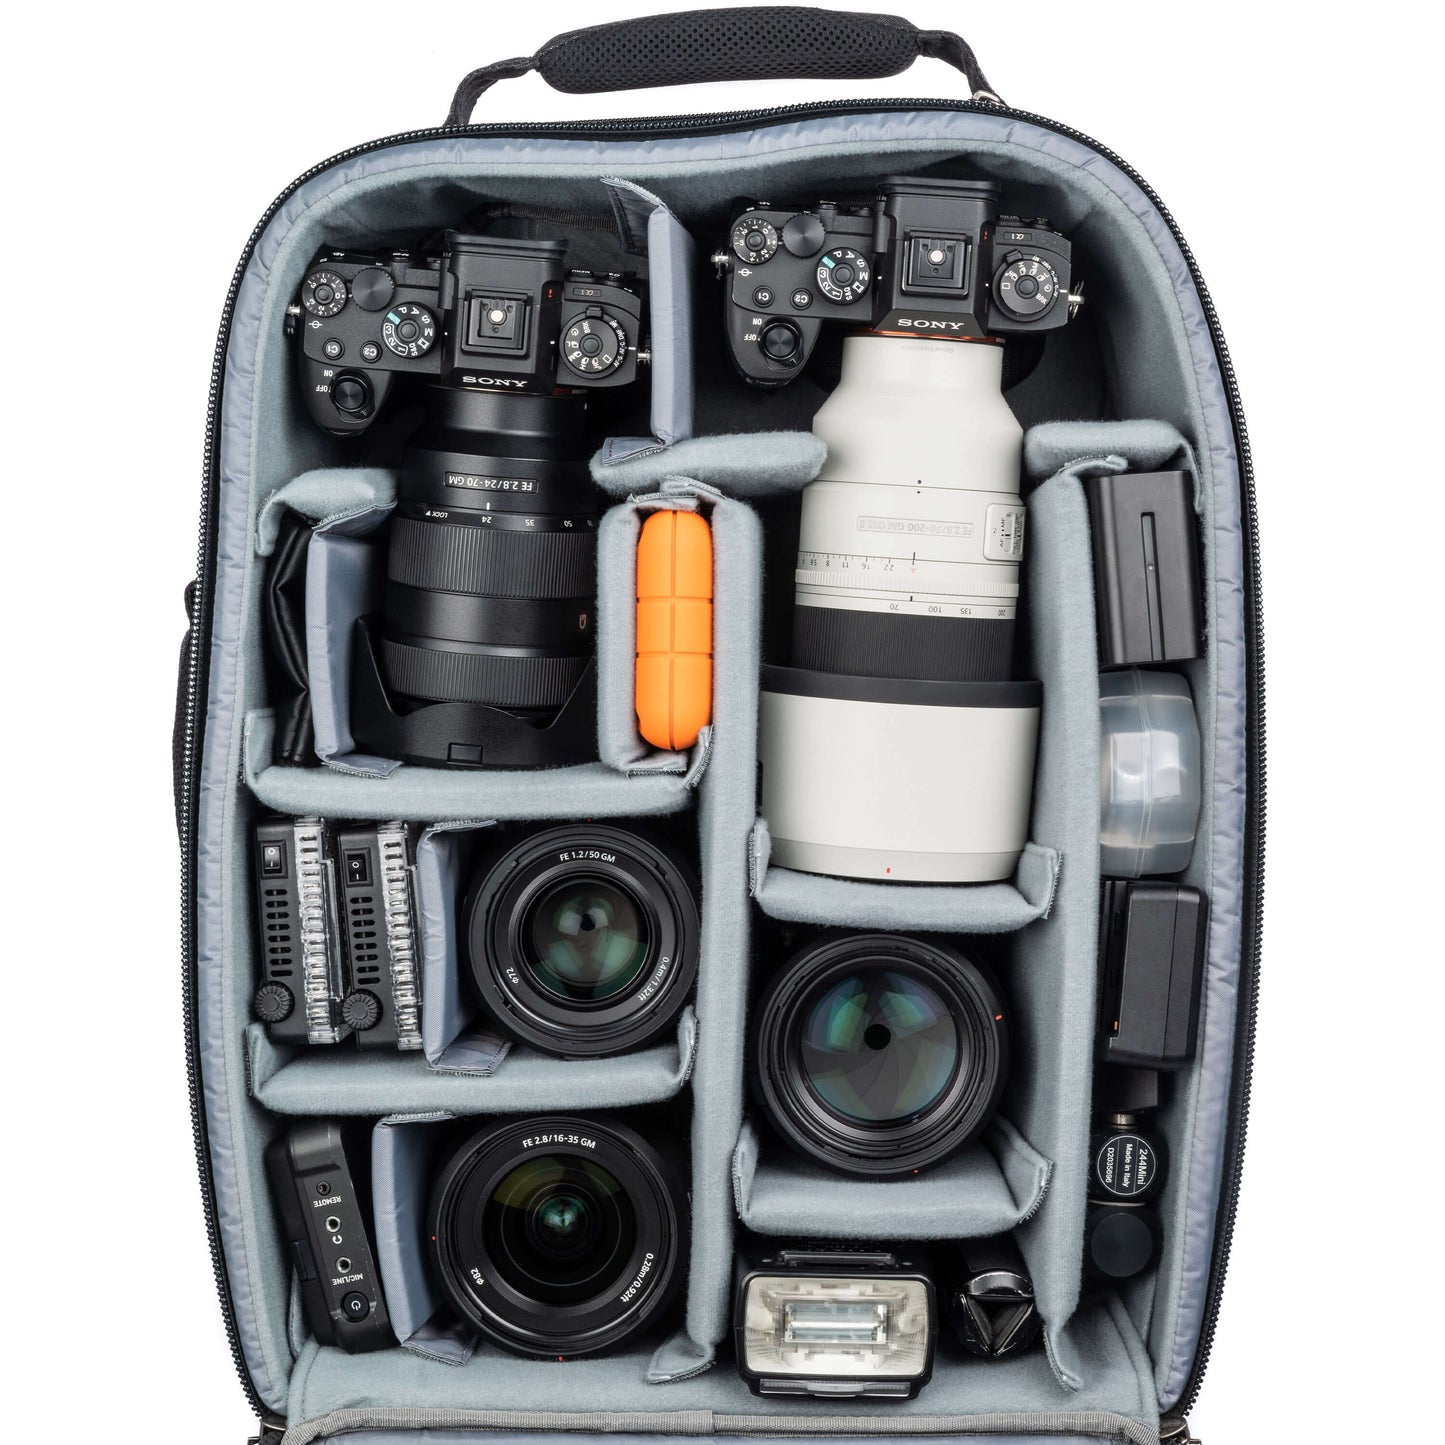 Quality Camera Bags for Every Adventure | f-stop